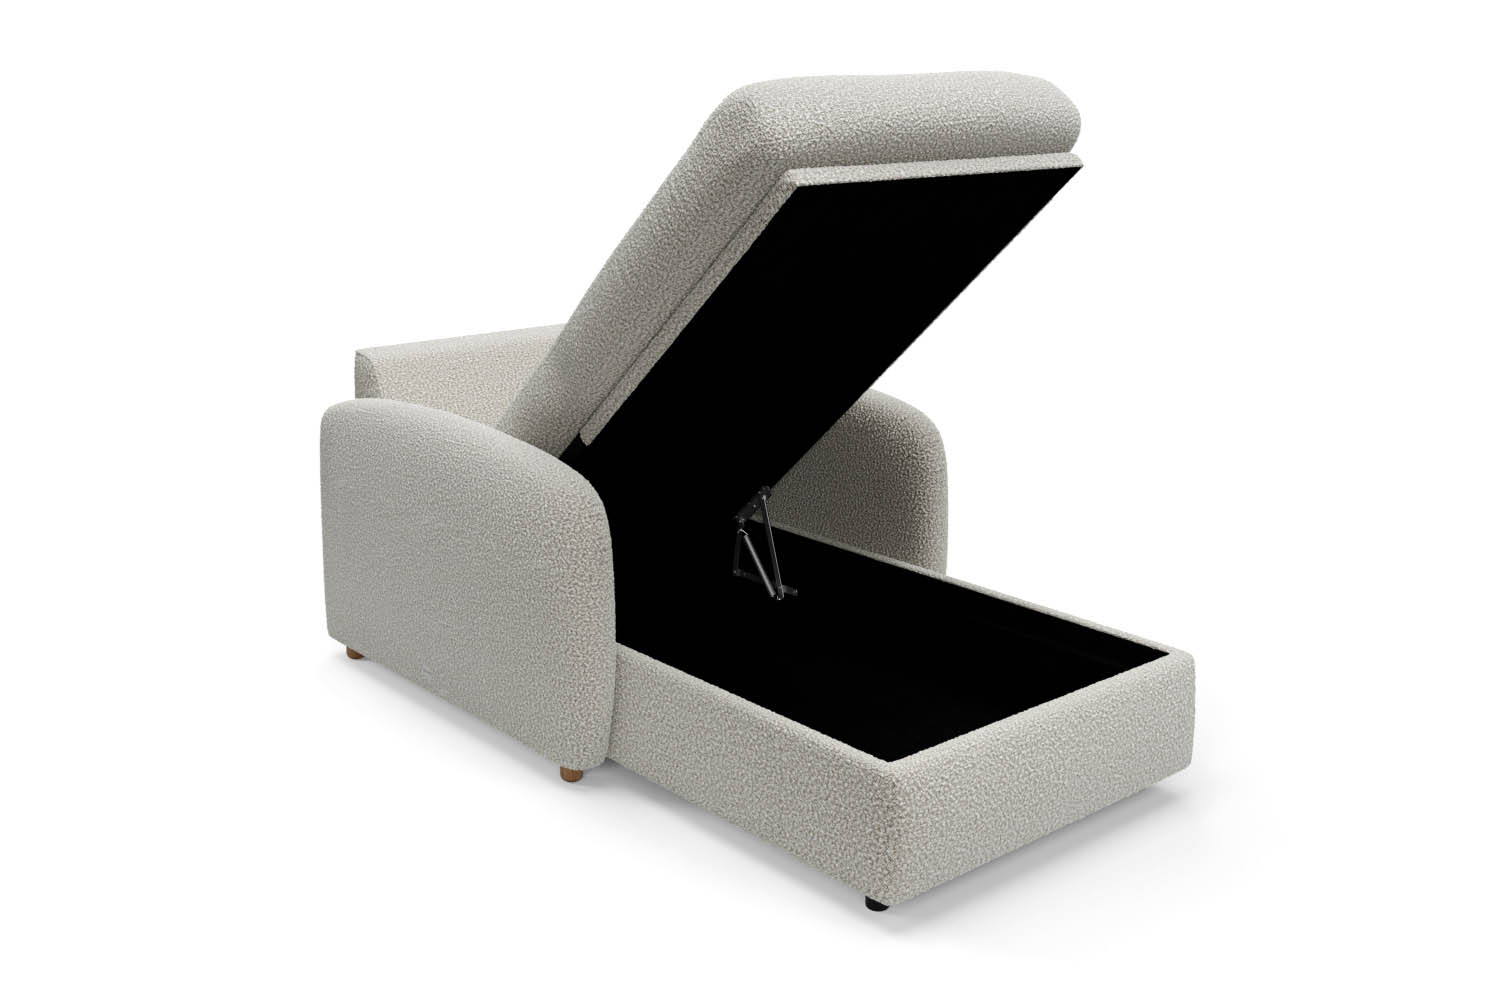 The Small Biggie - Chaise Longue - Fuzzy White Boucle